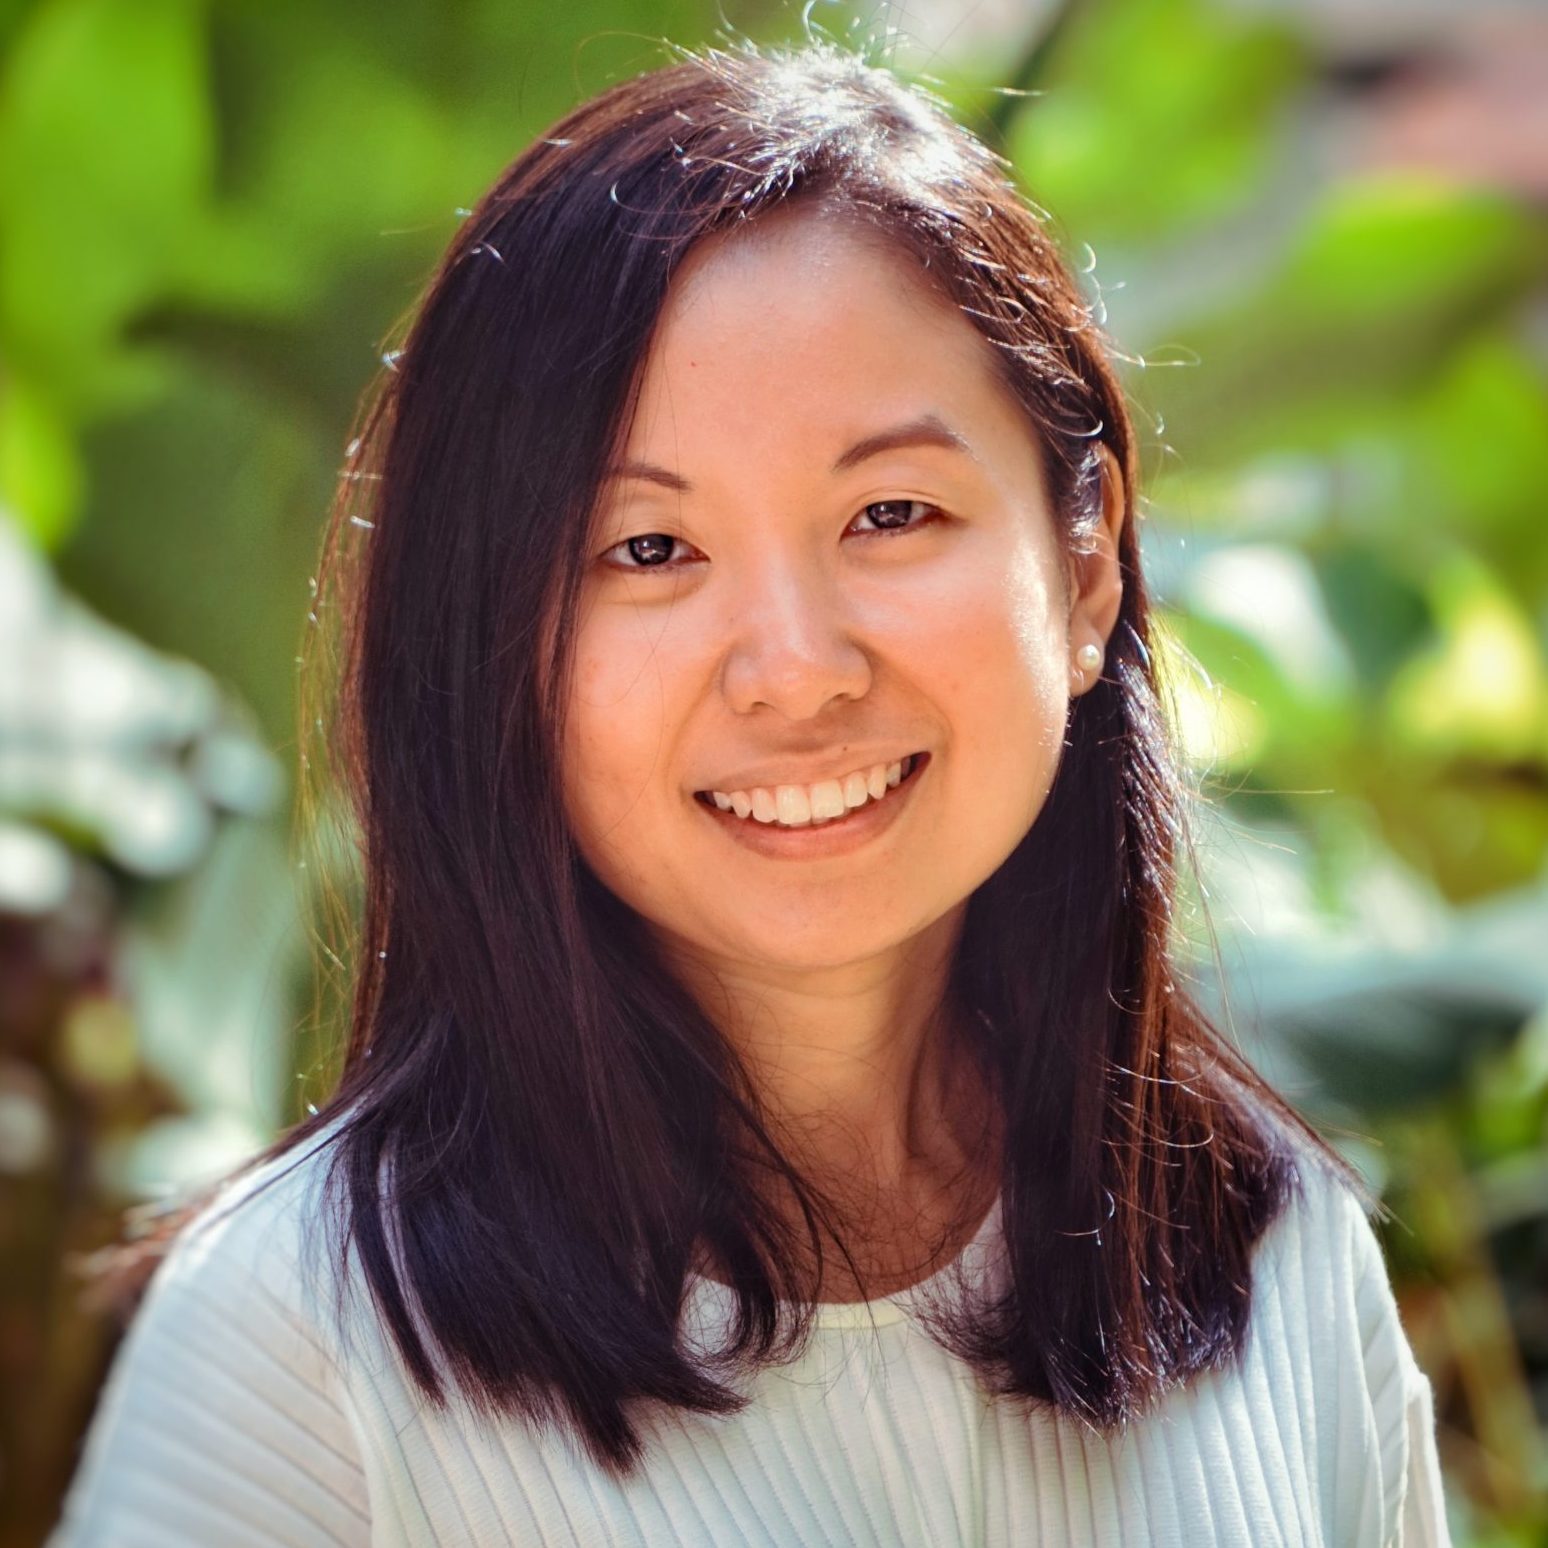 <b> Dr Robyn Tan </b>
<br> Research Fellow, 
<br>Social Service Research Centre, 
<br> National University of Singapore 